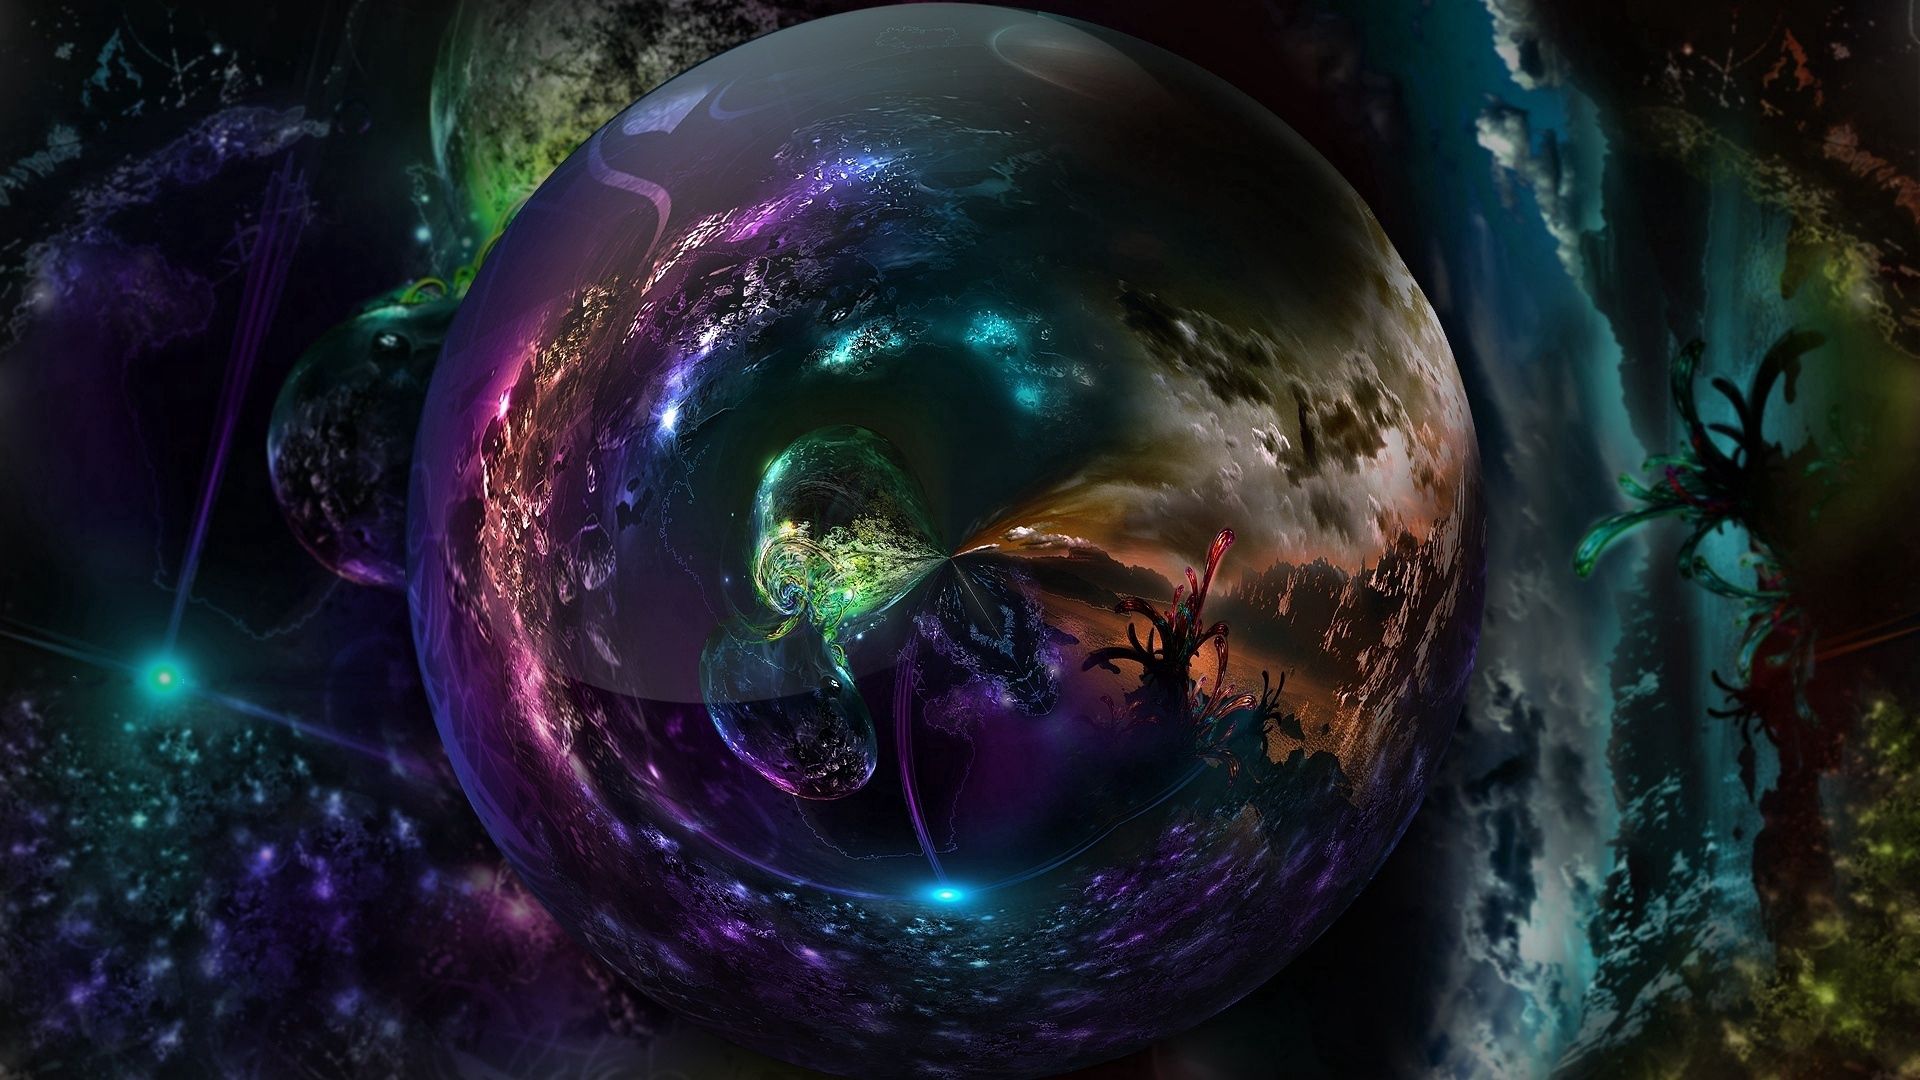 Download wallpaper 1920x1080 crystal ball, colorful, reflection, fate HD background